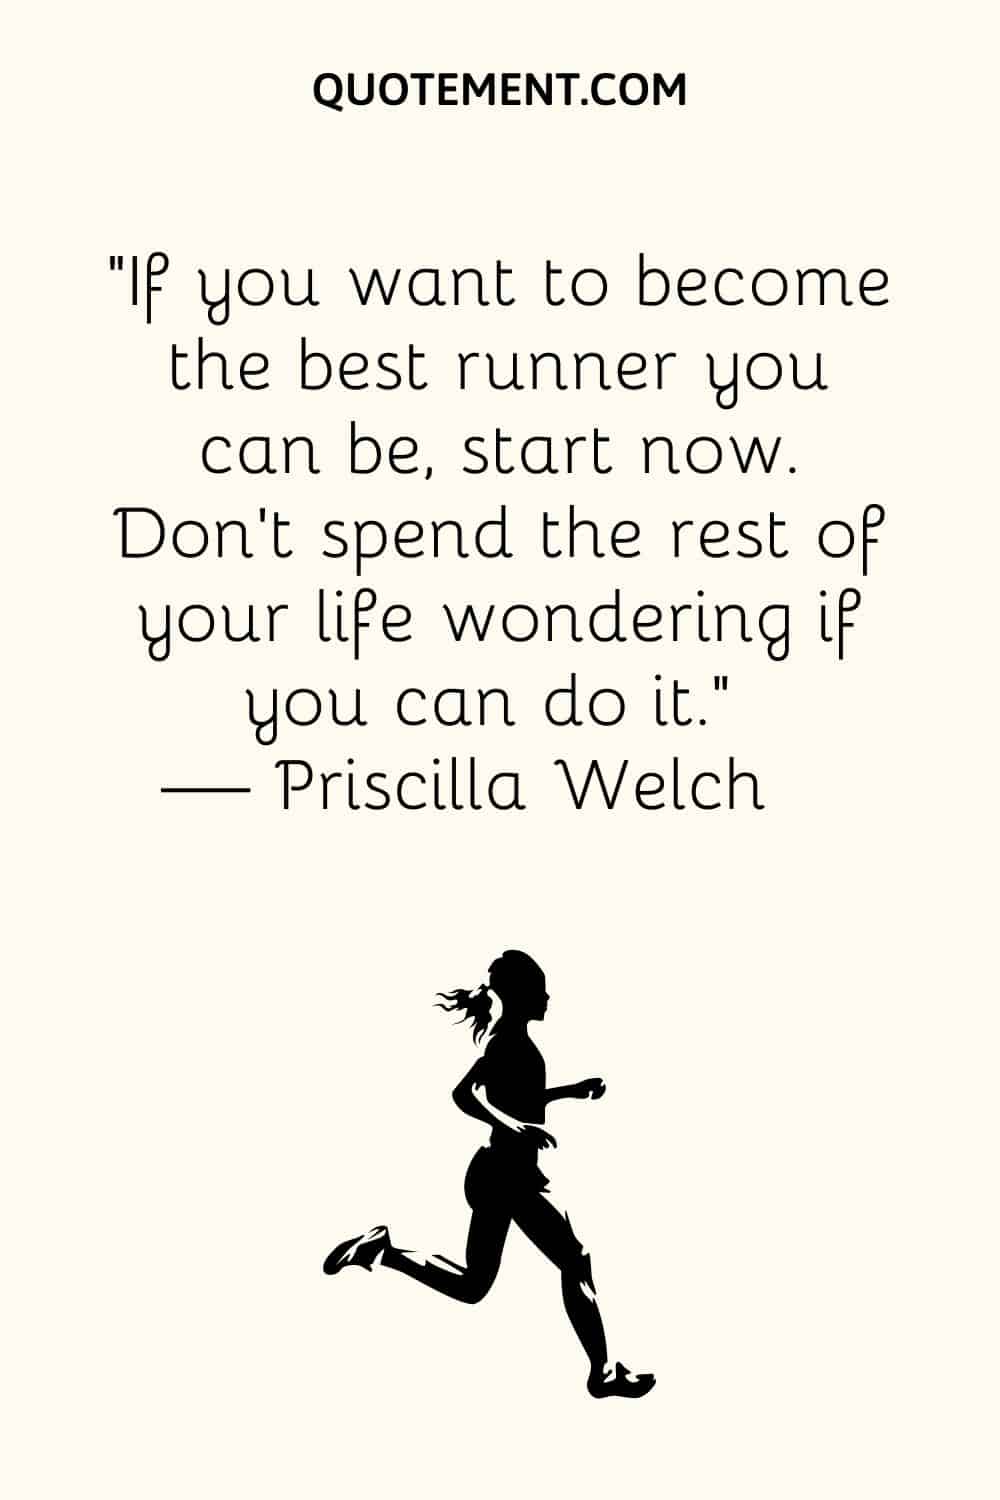 If you want to become the best runner you can be, start now